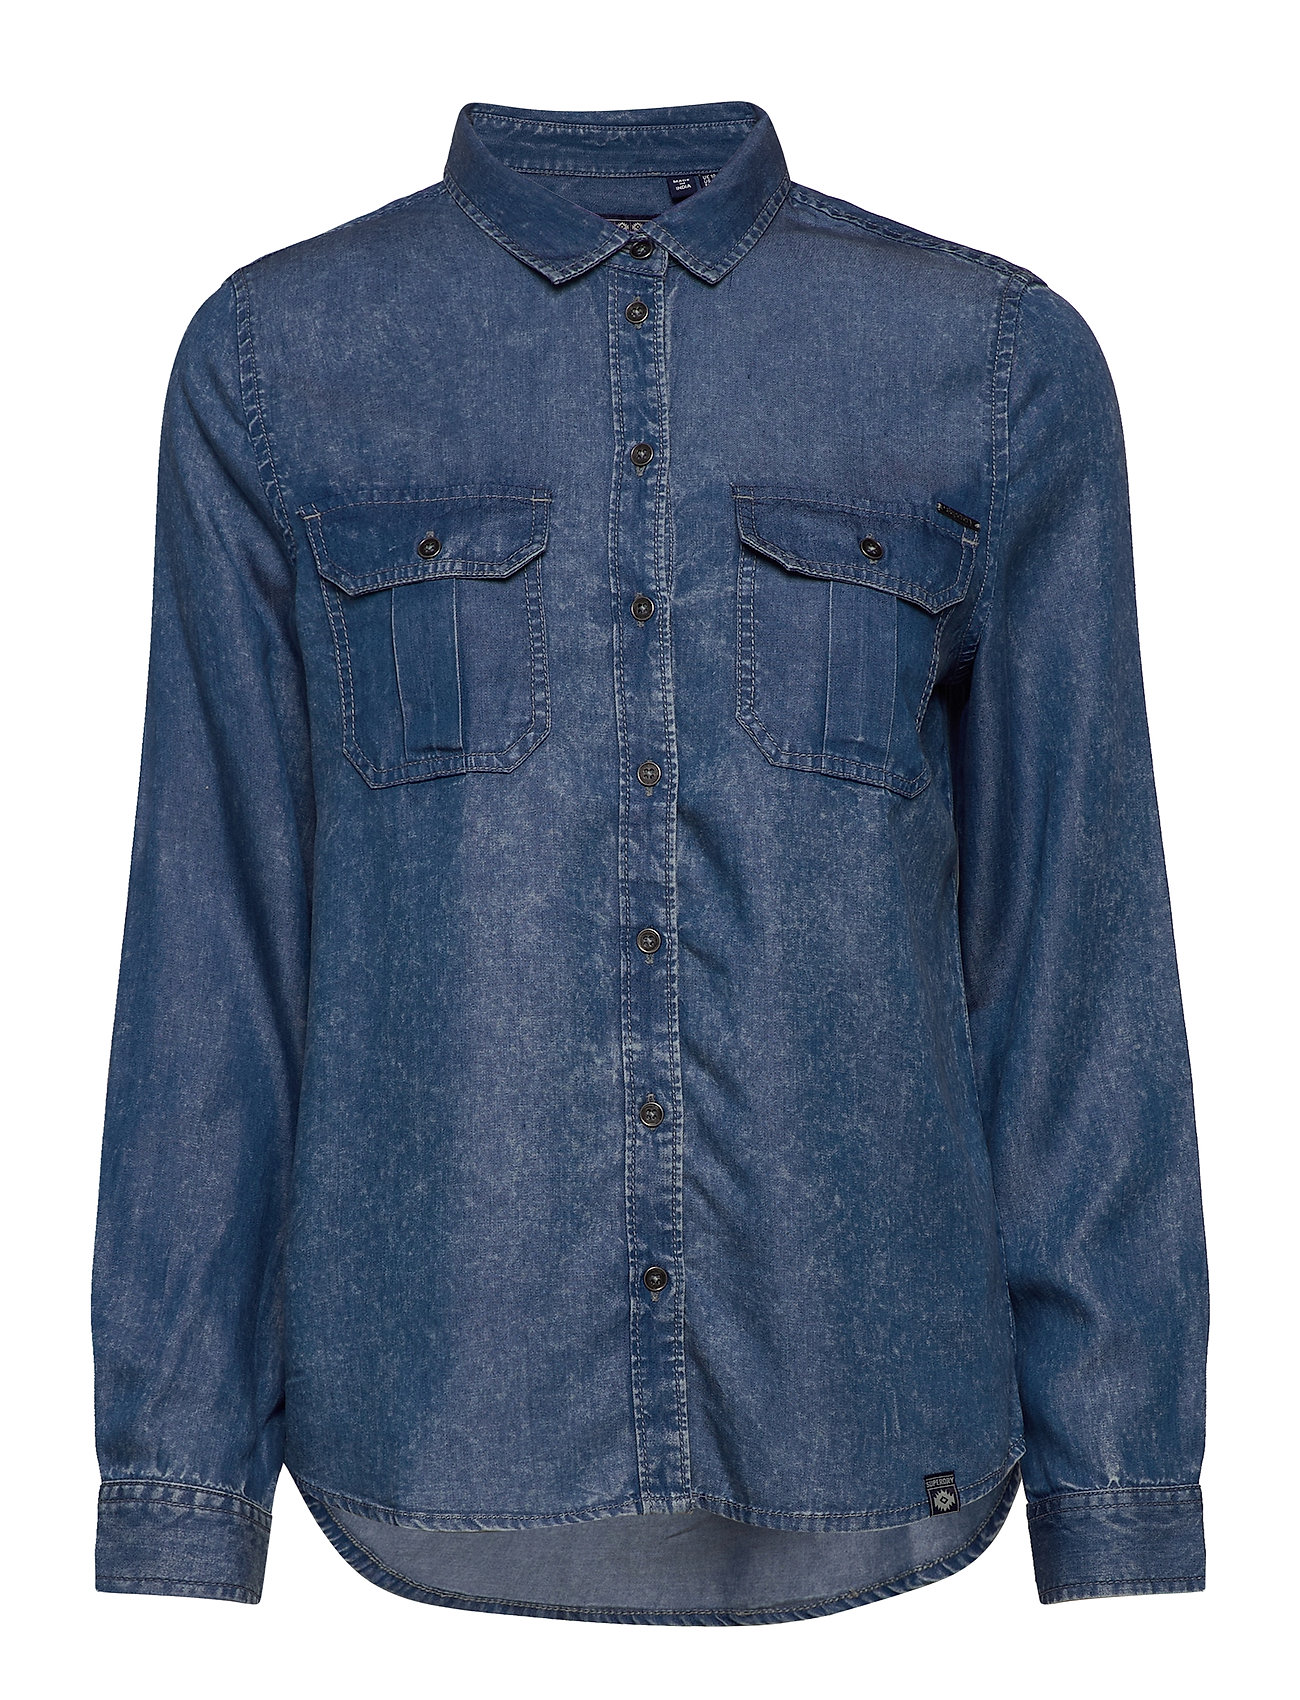 Cleo + Wolf Women's Oversized Denim Shirt - Country Outfitter